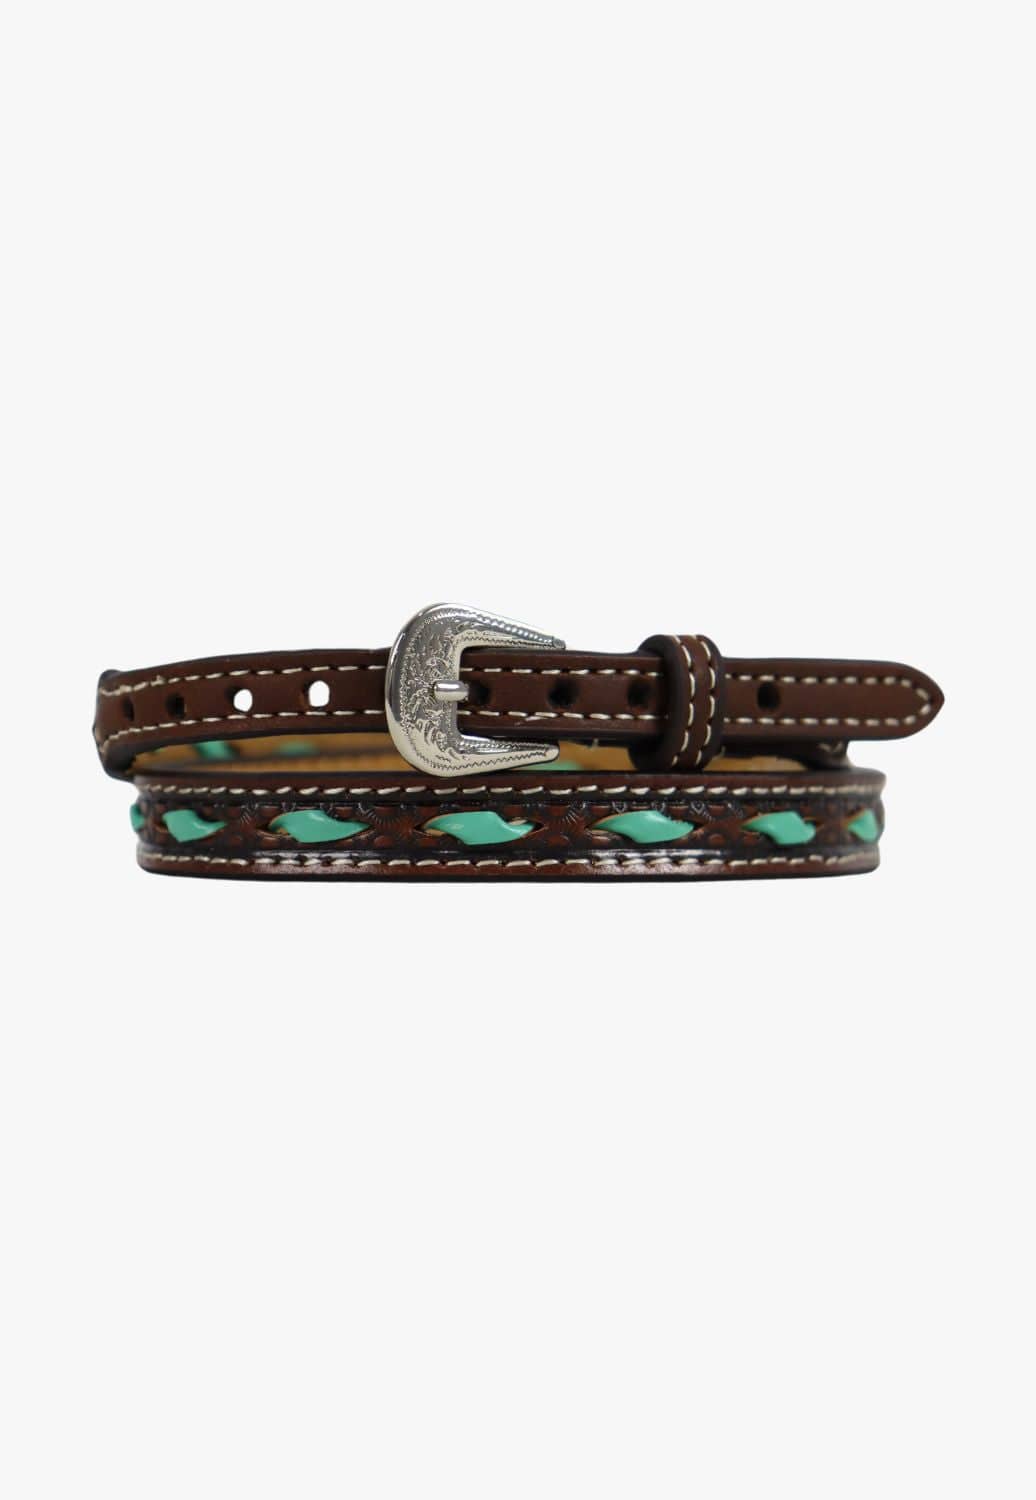 M and F Western ACCESSORIES-Hat Bands Brown/Turquoise M and F Western Leather Rawhide Hatband